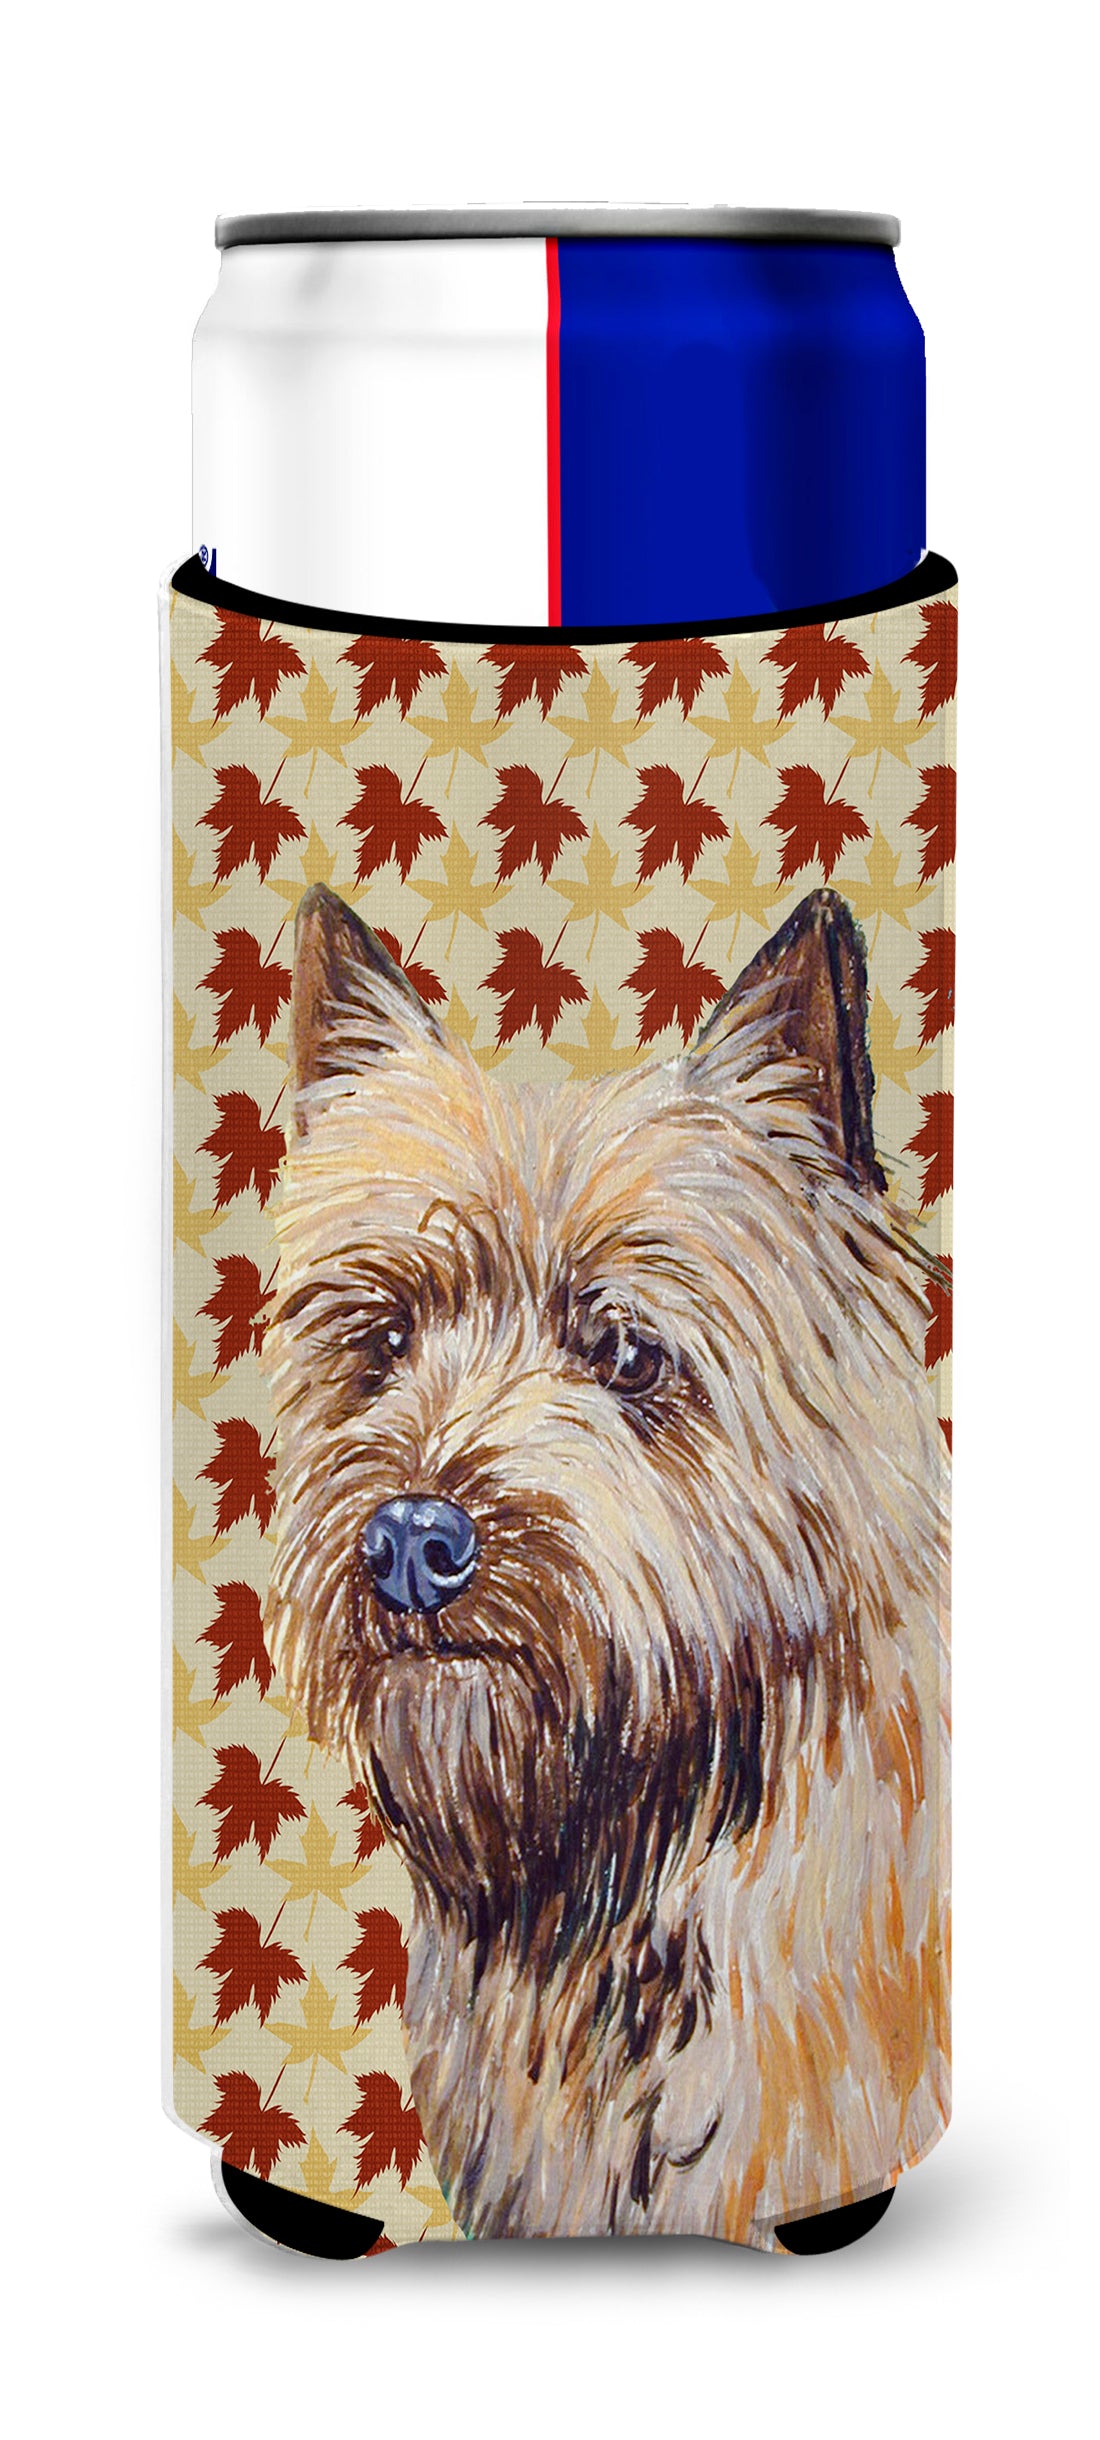 Cairn Terrier Fall Leaves Portrait Ultra Beverage Insulators for slim cans LH9095MUK